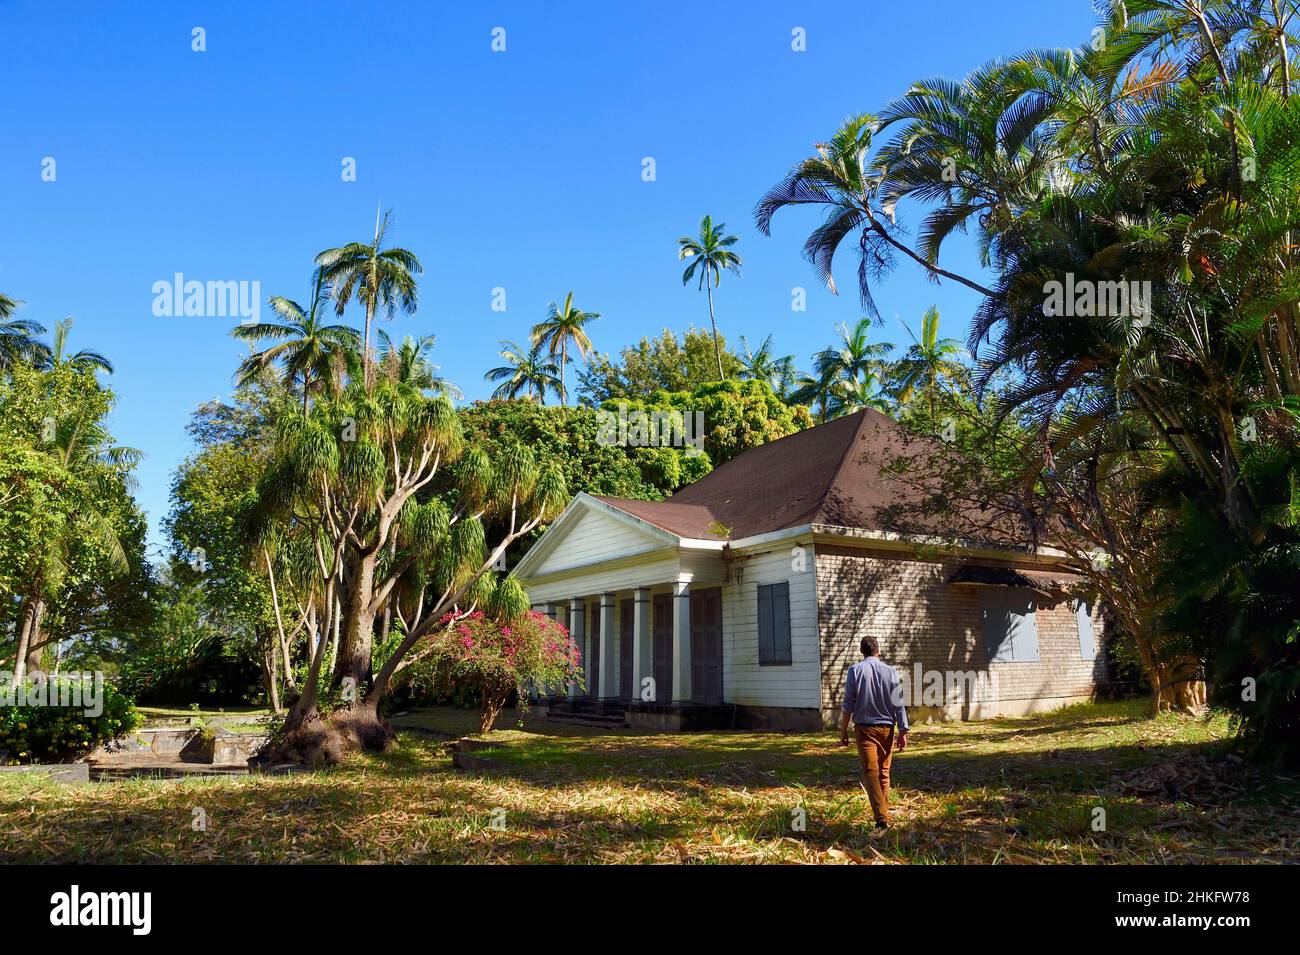 France, Reunion island (French overseas department), historic Case (house) of the Isautier family plantation in the heights of Saint-Pierre, in the foreground on the left a tree called Elephant's Foot (Beaucarnea recurvata) Stock Photo